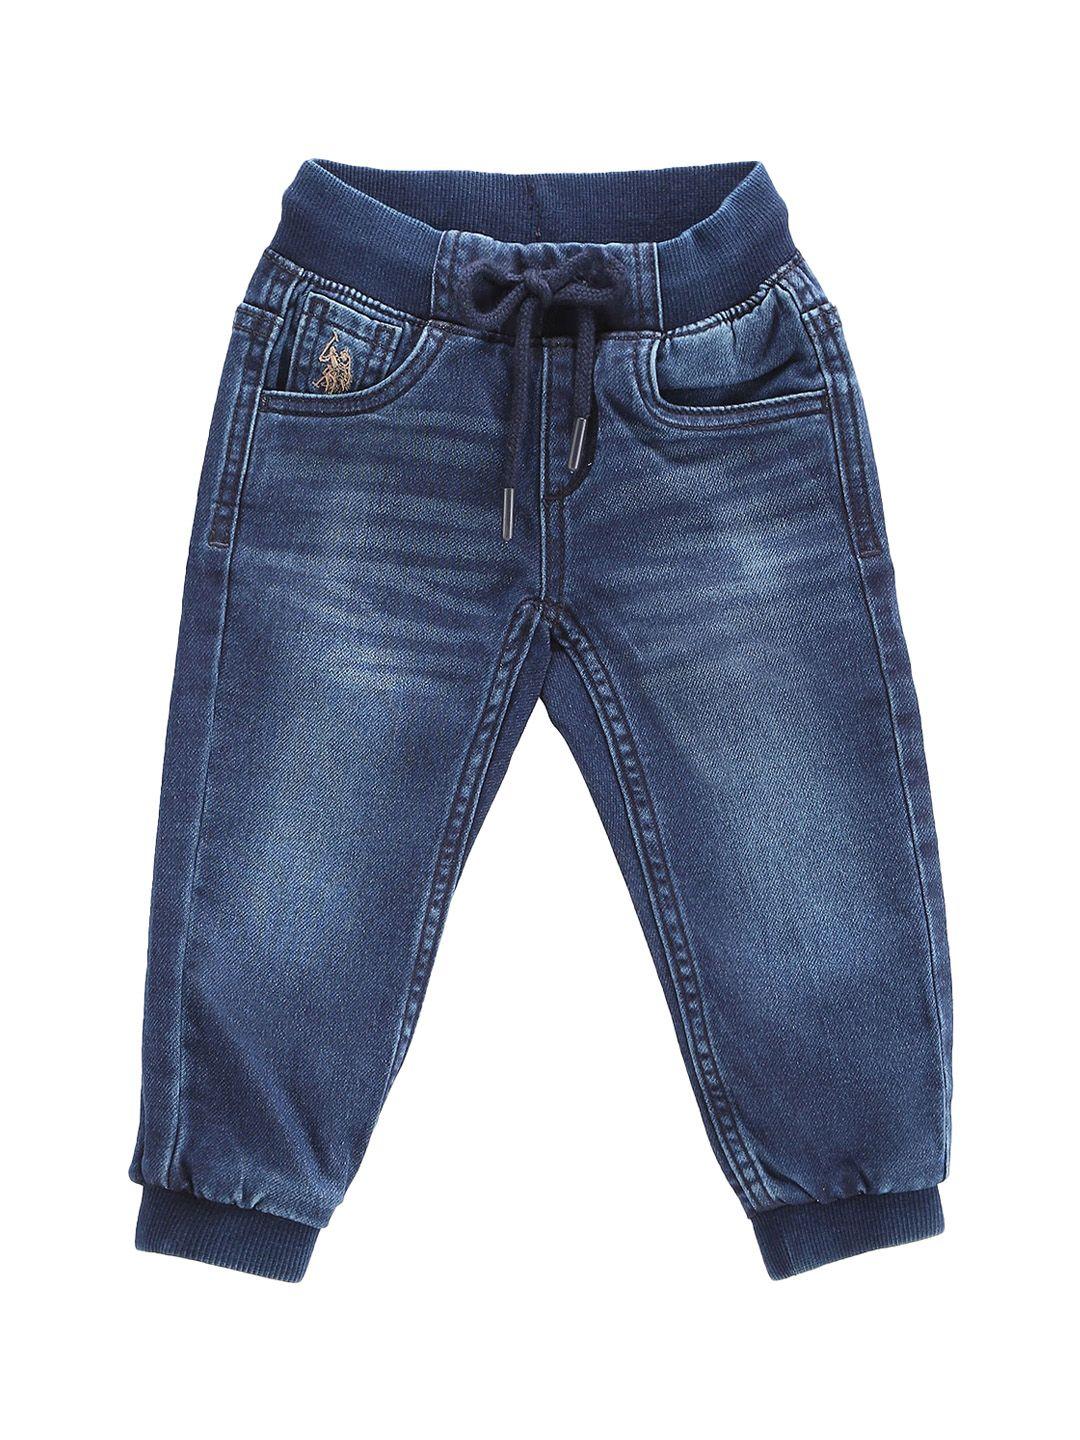 u.s.-polo-assn.-kids-boys-jogger-light-fade-clean-look-stretchable-jeans